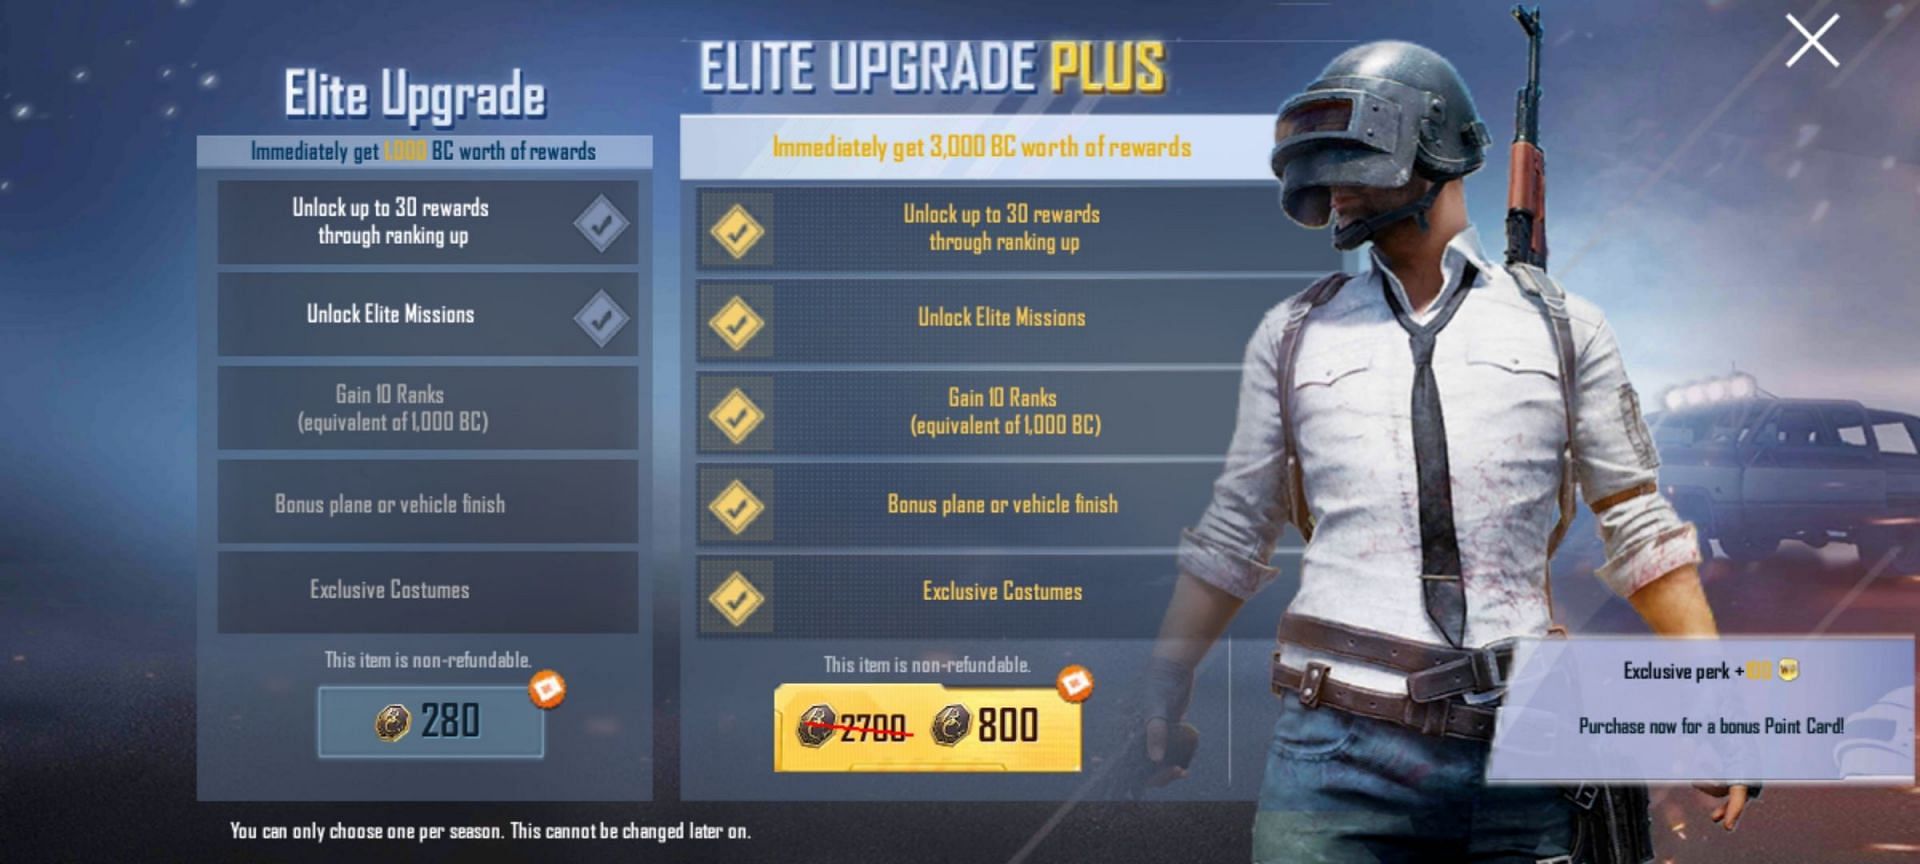 Follow the steps below to upgrade the pass (Image via Tencent)